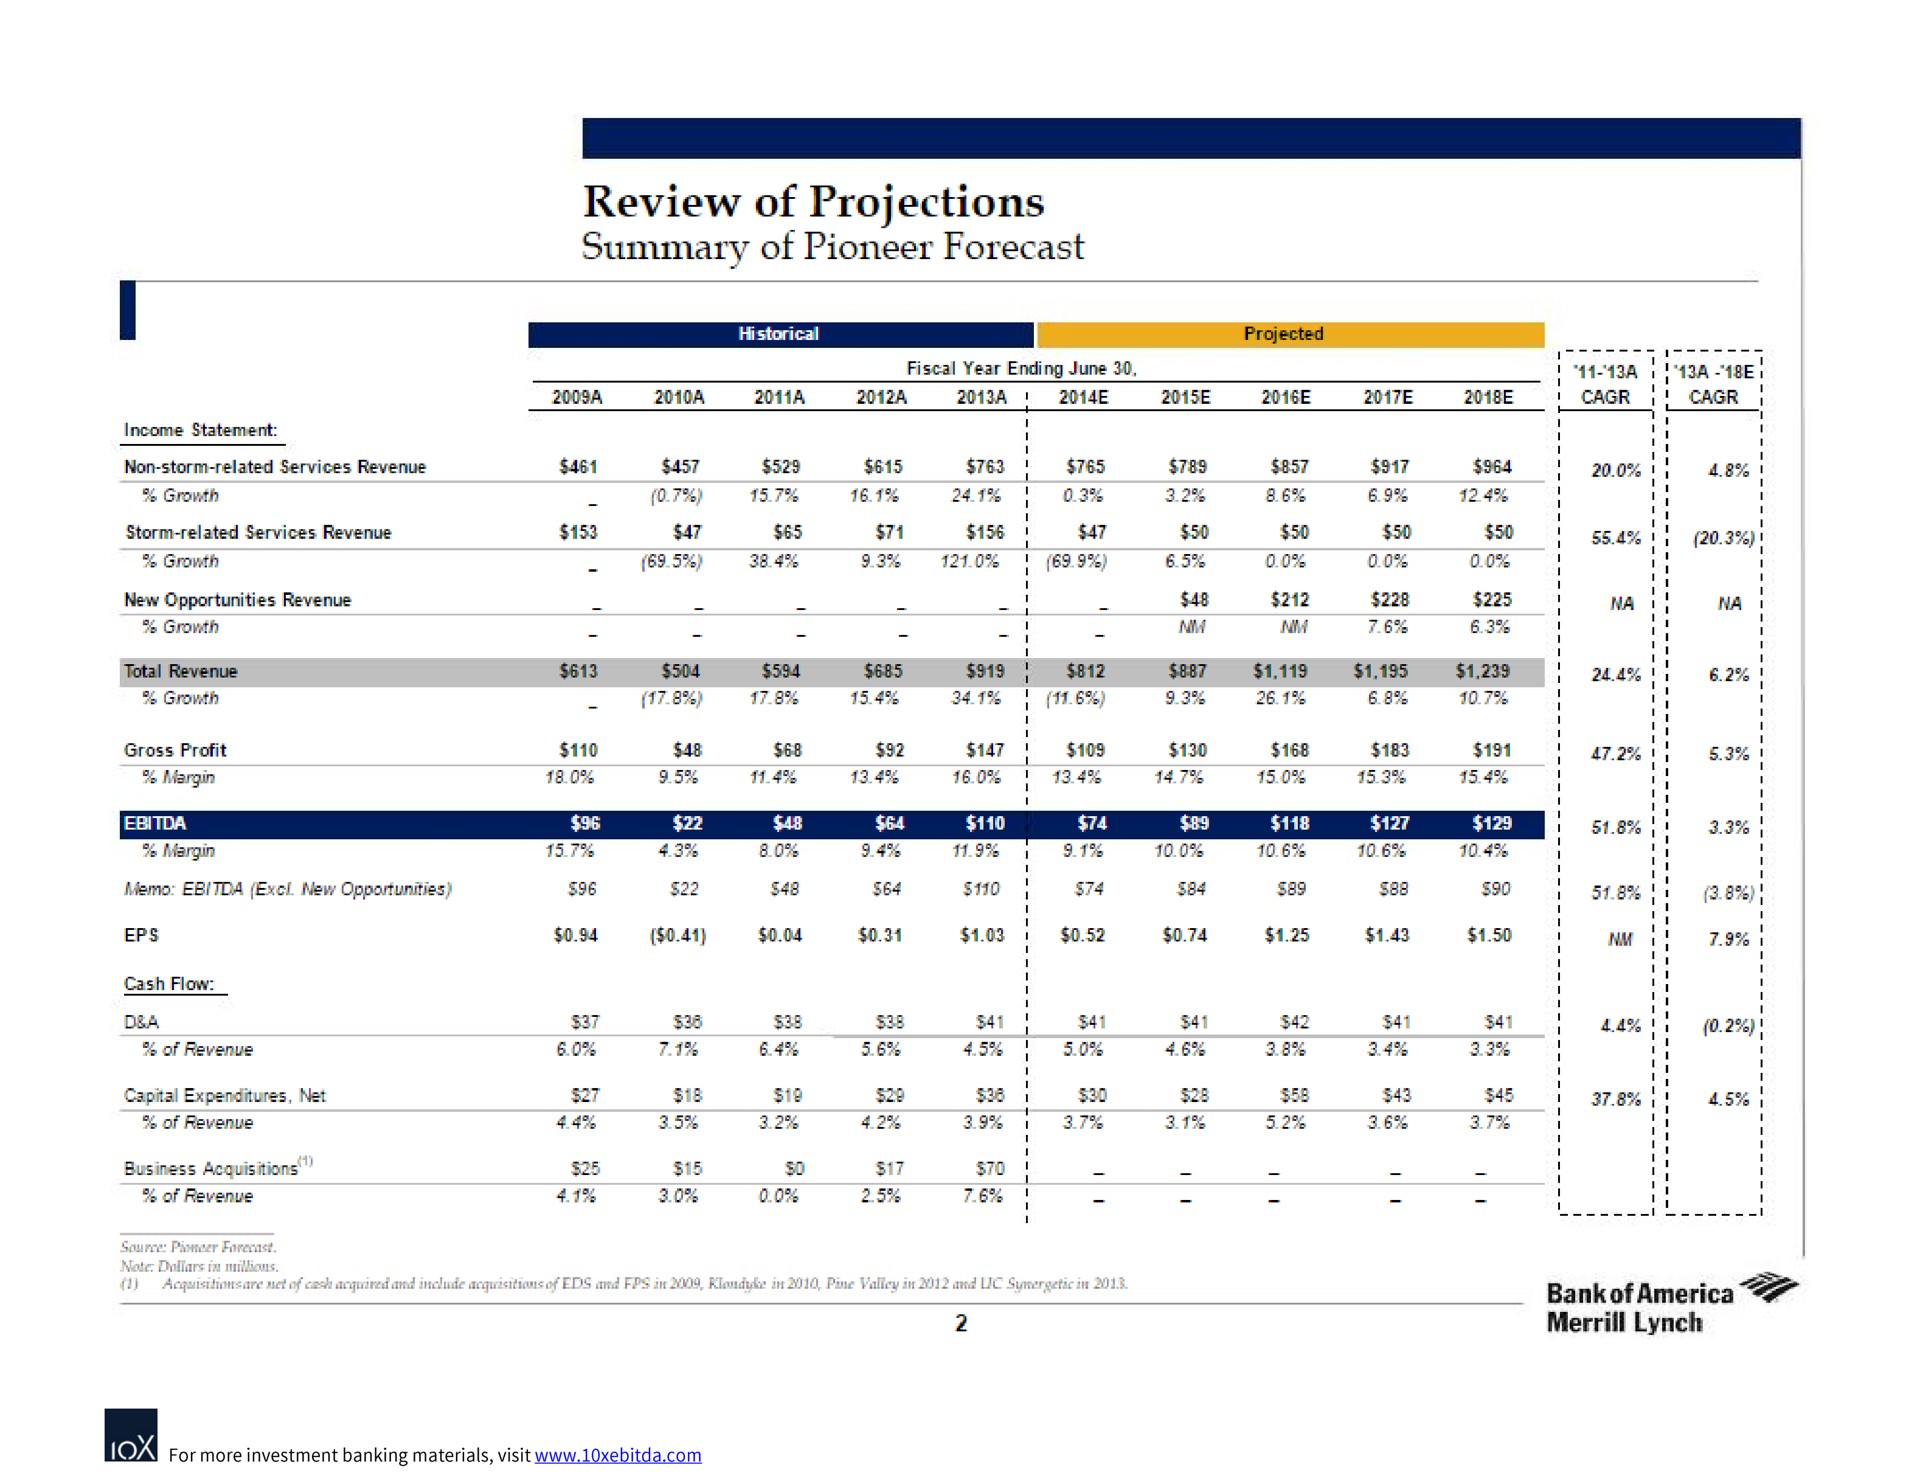 review of projections of pioneer forecast a projected | Bank of America